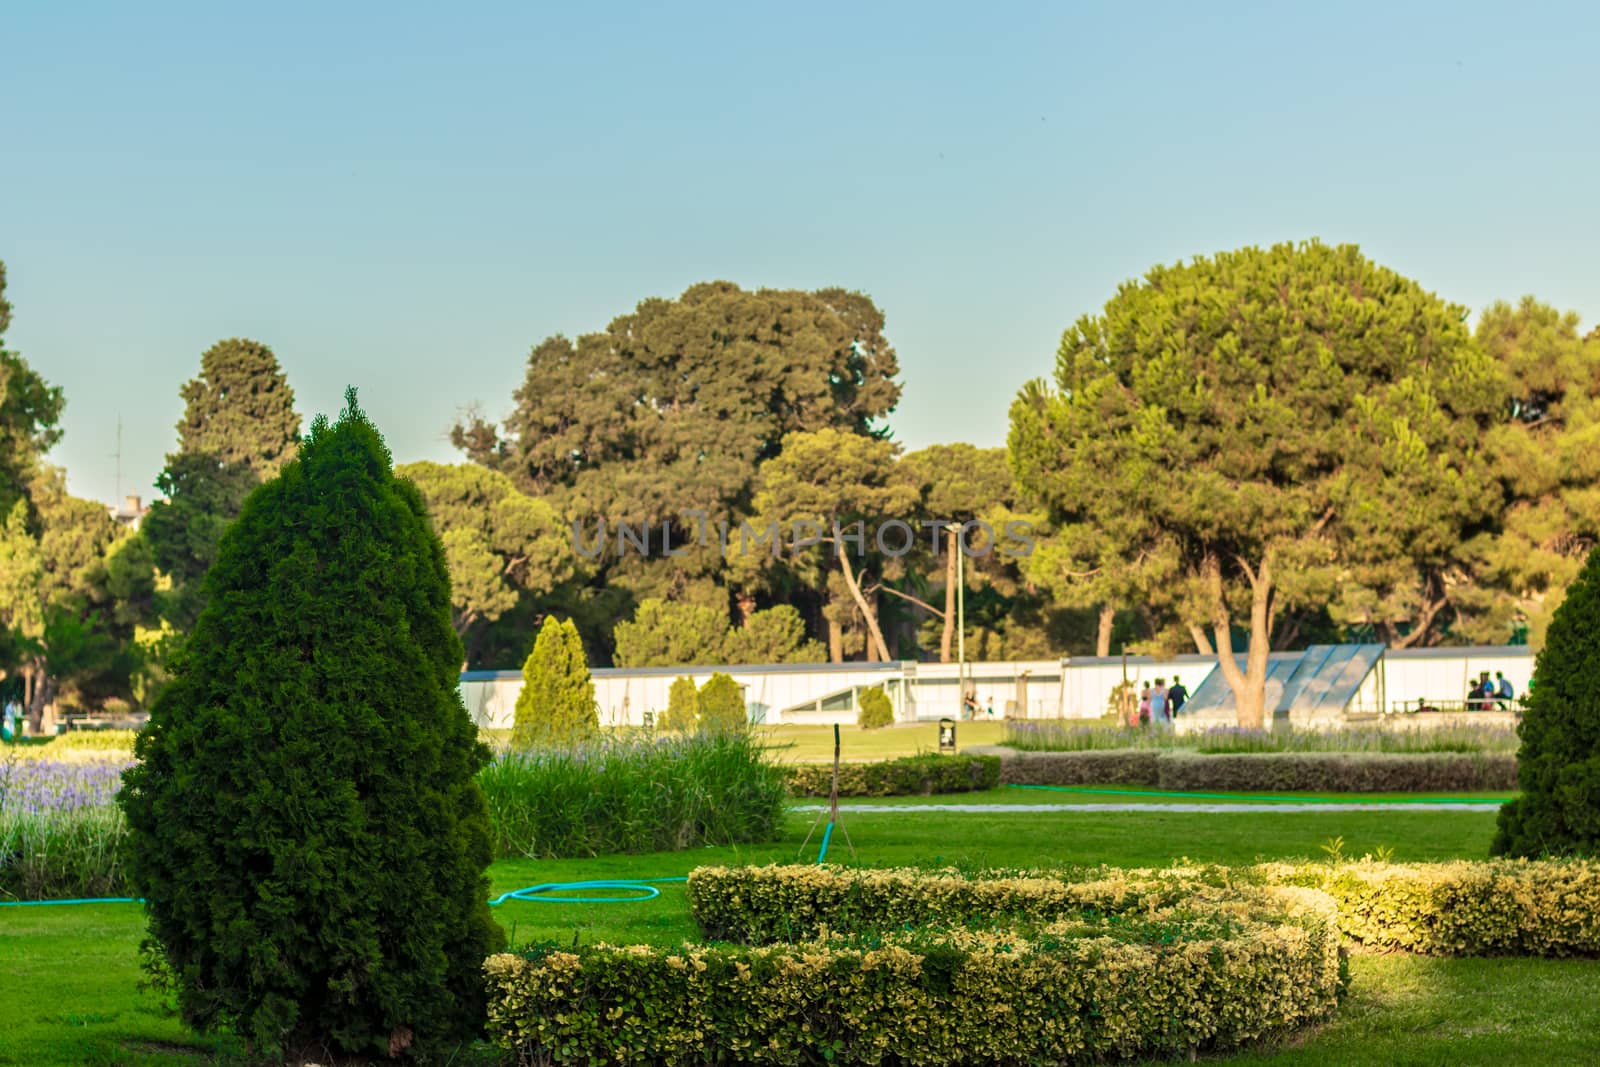 a wide landscape shoot from a very nice looking green park. photo has taken at izmir/turkey.